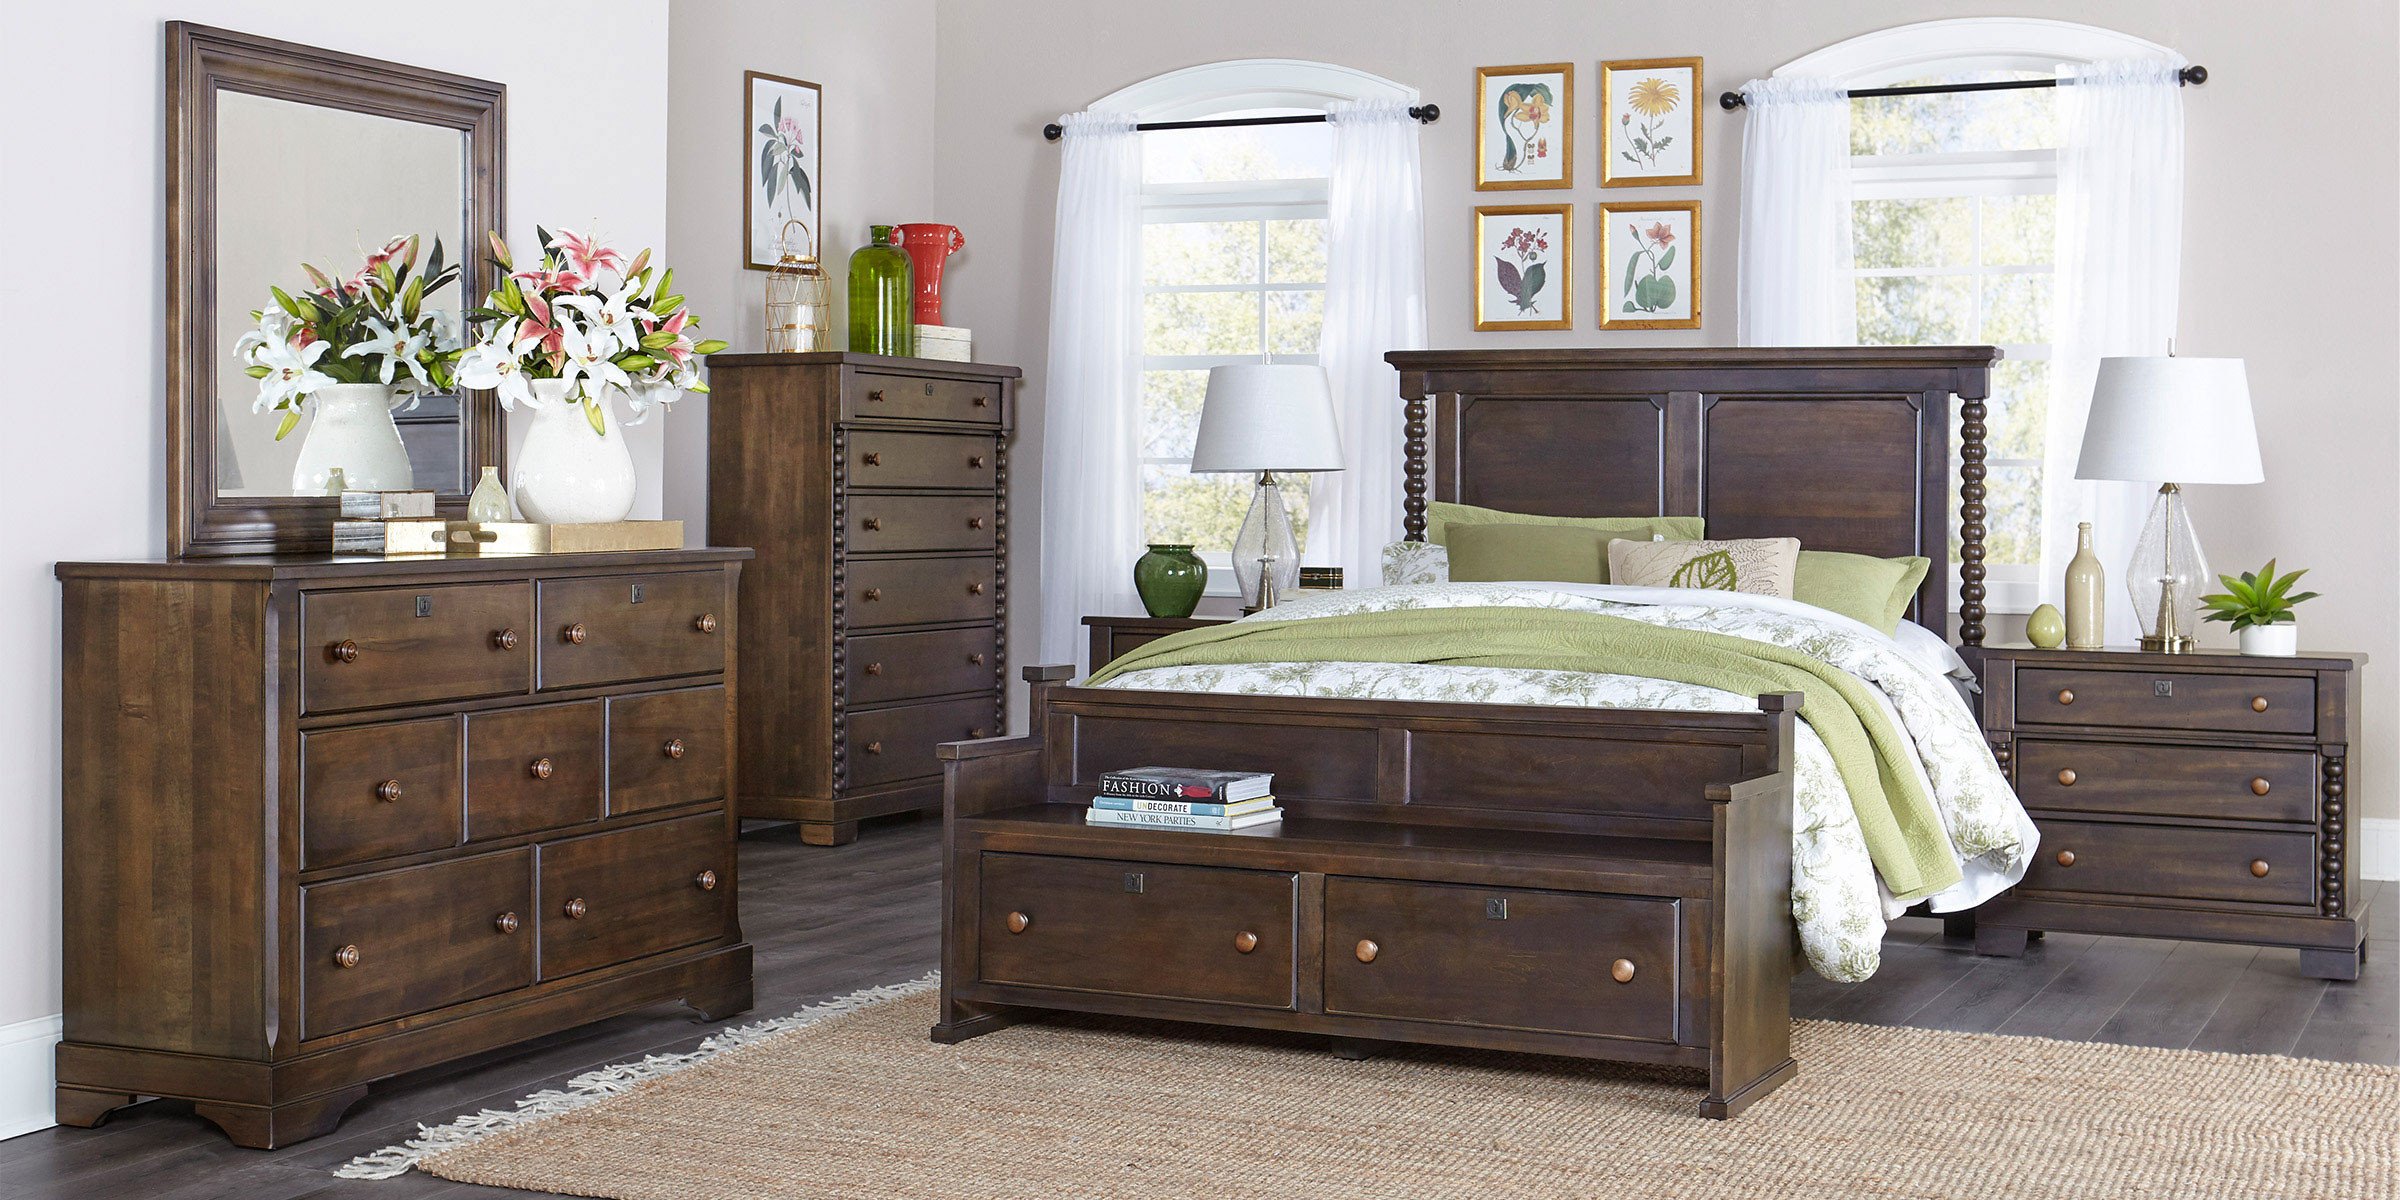 bedroom furniture from costco reviews